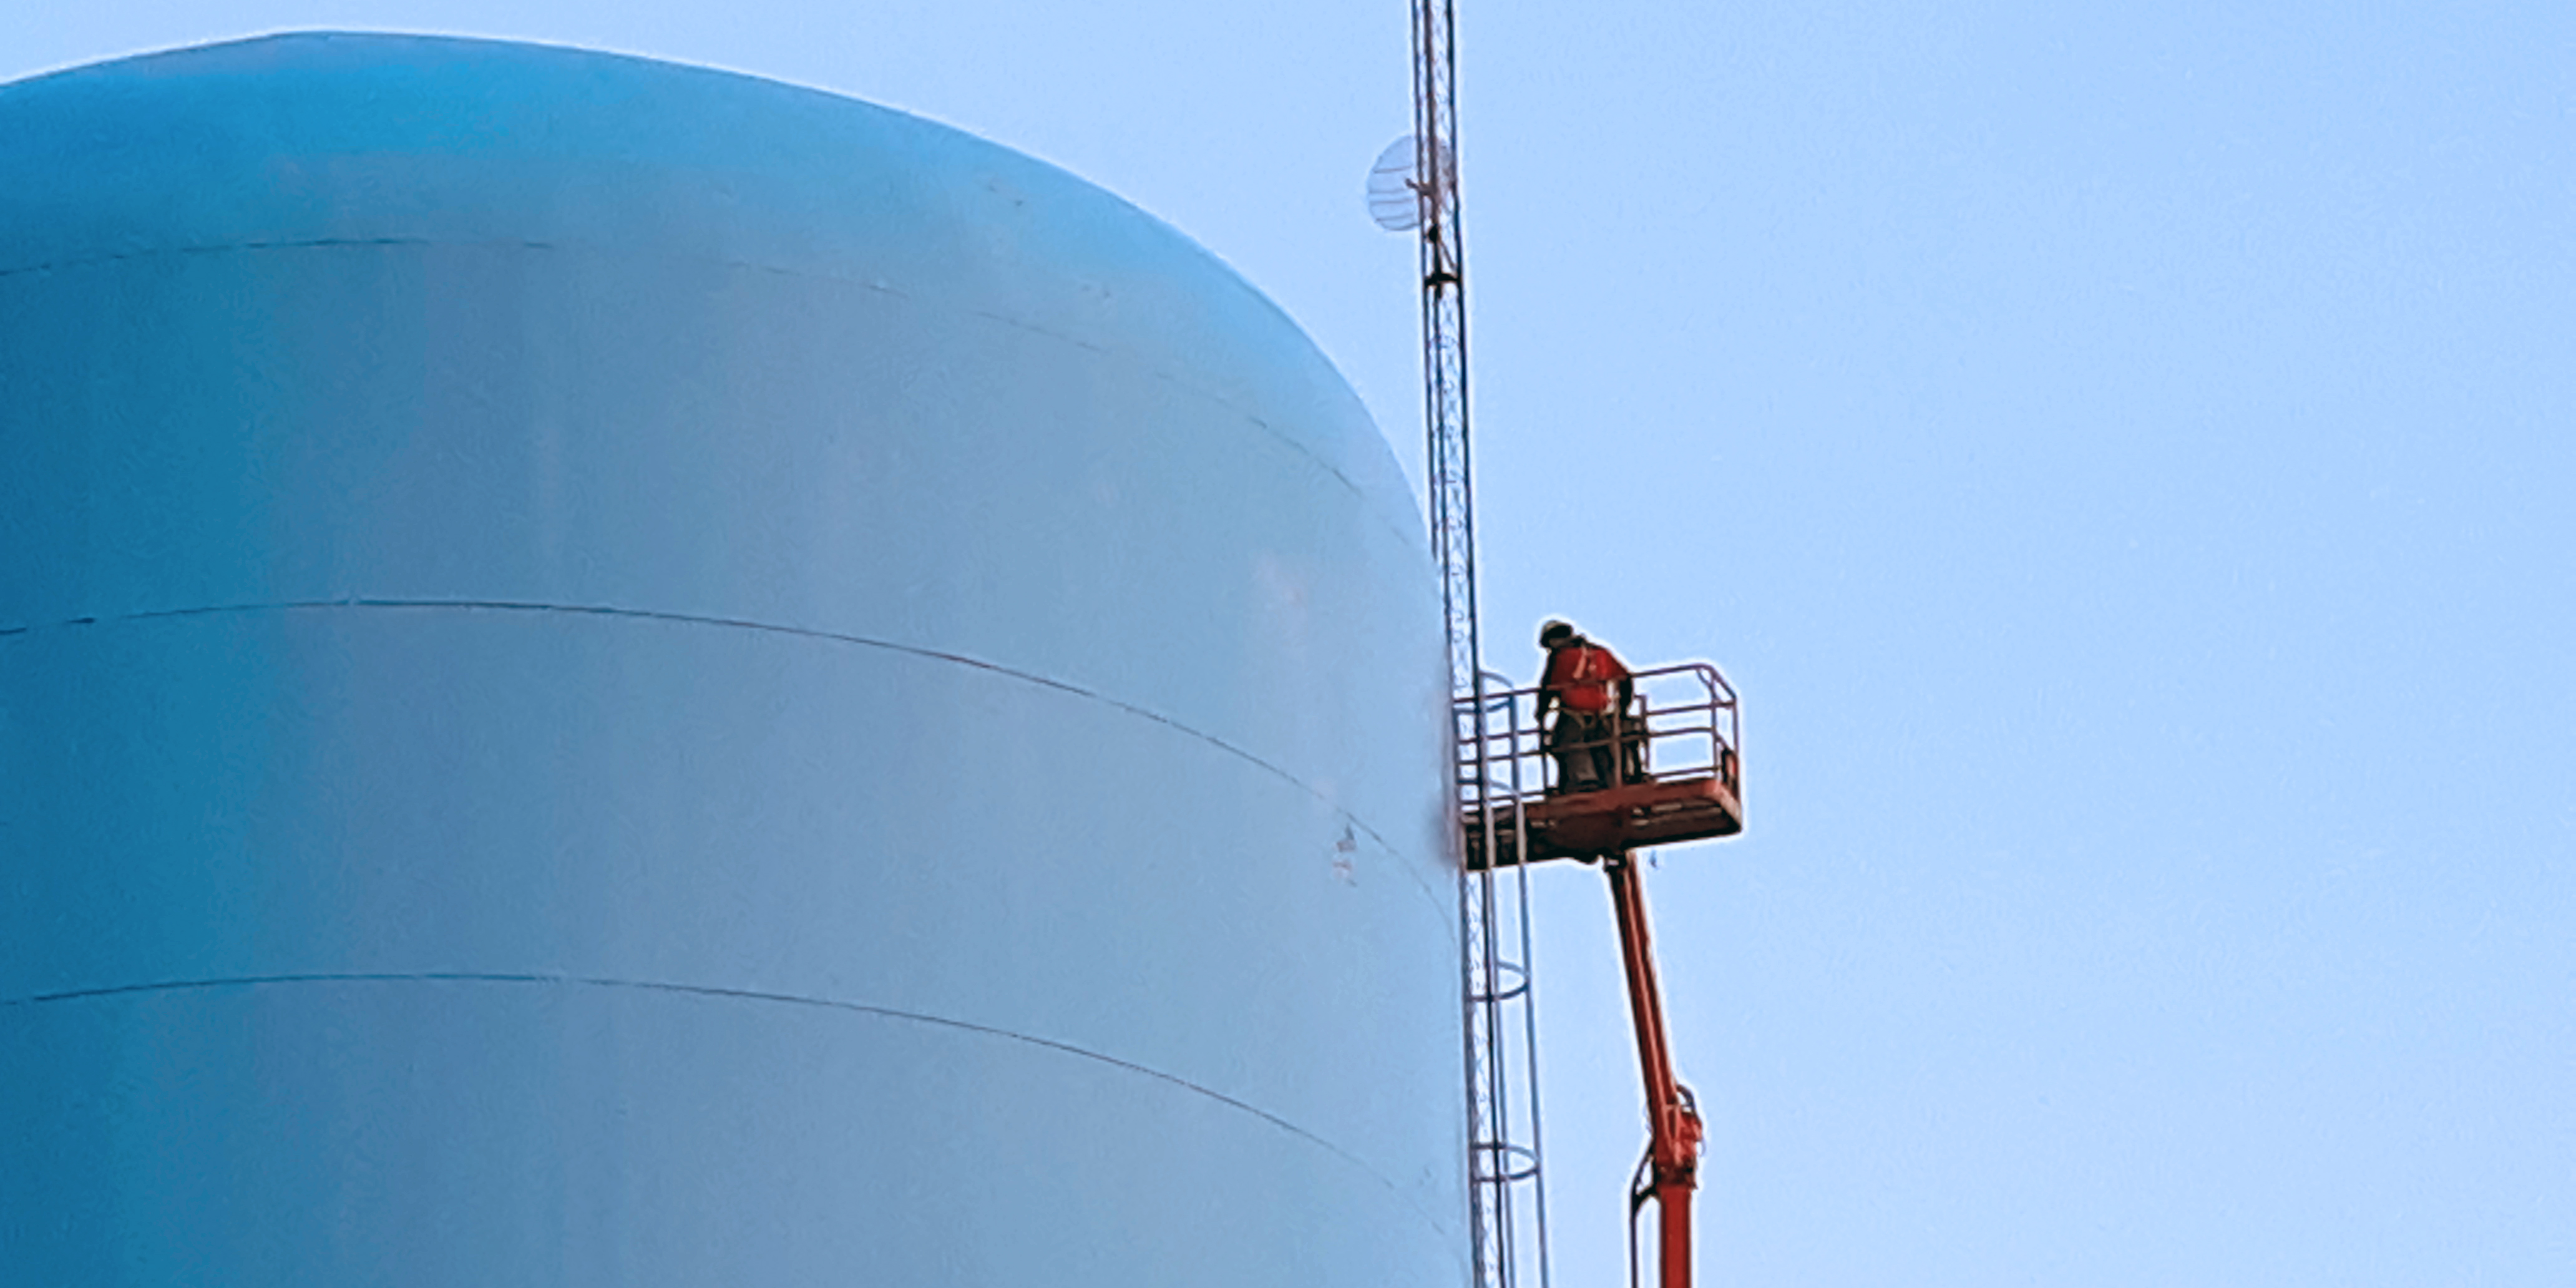 Technician on fully extended man lift servicing electrical components at the top of a water tower